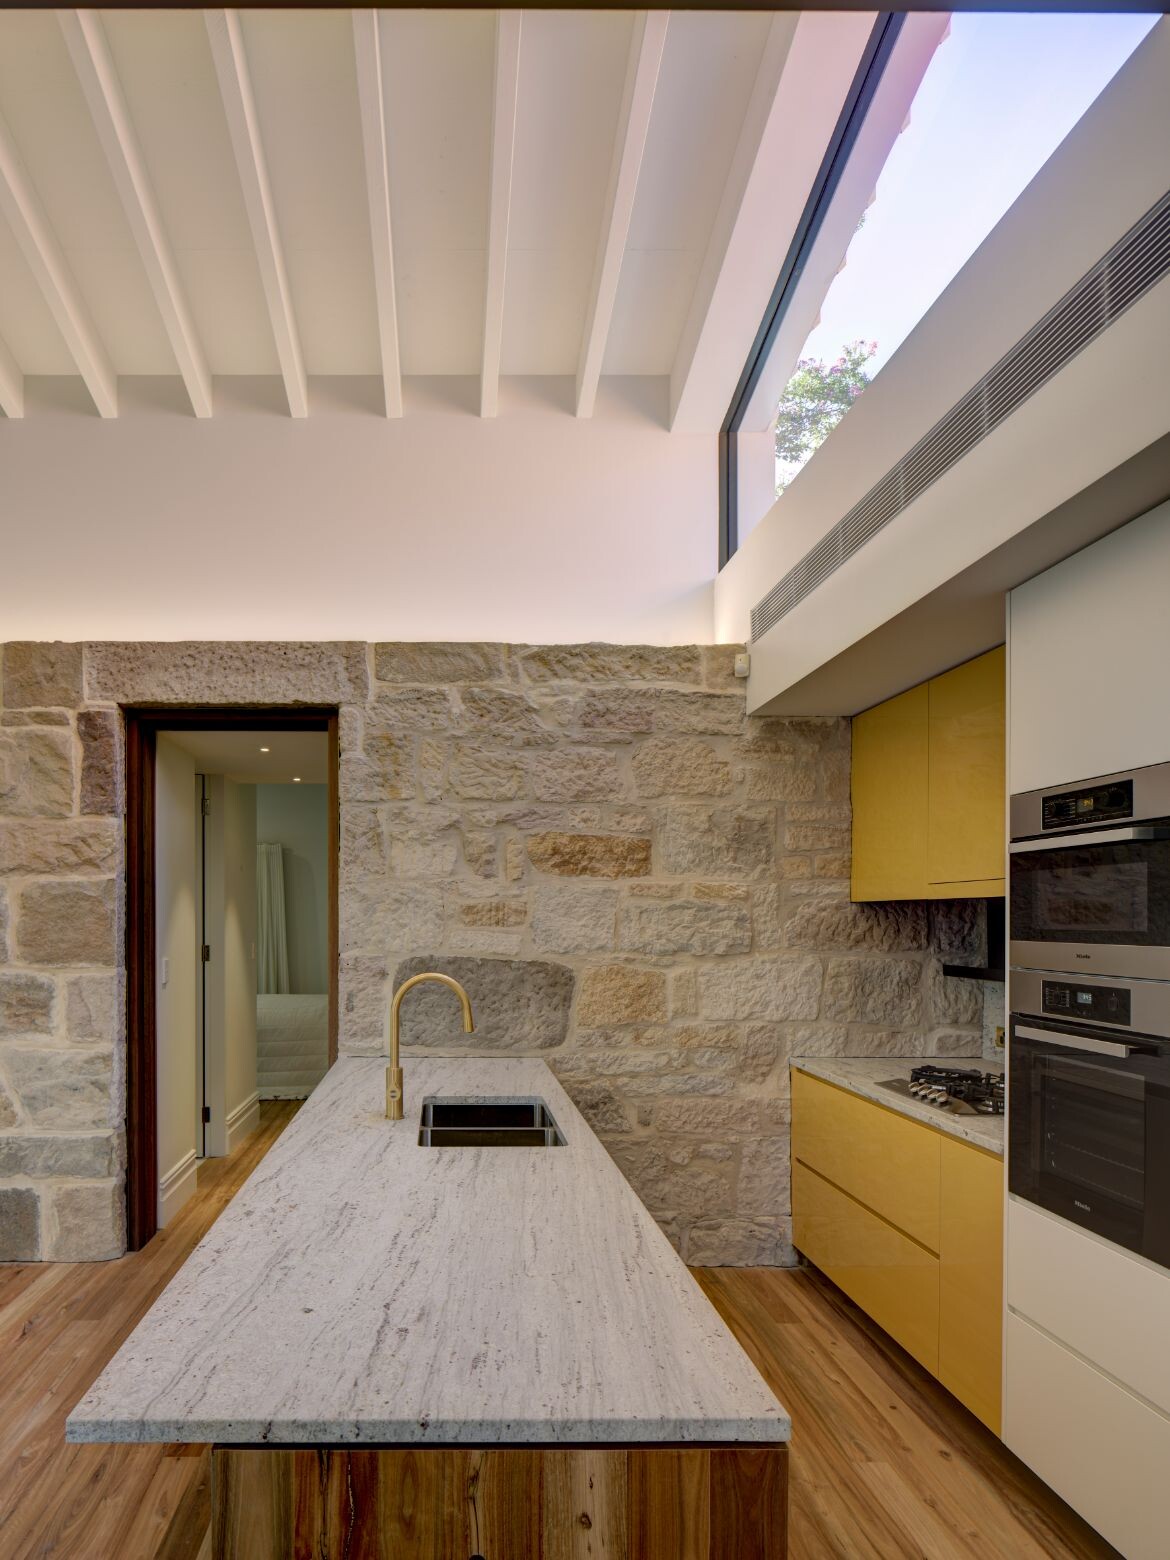 A skylight up high brings natural light into the kitchen at Hunters Hill House by Glyde Bautovich